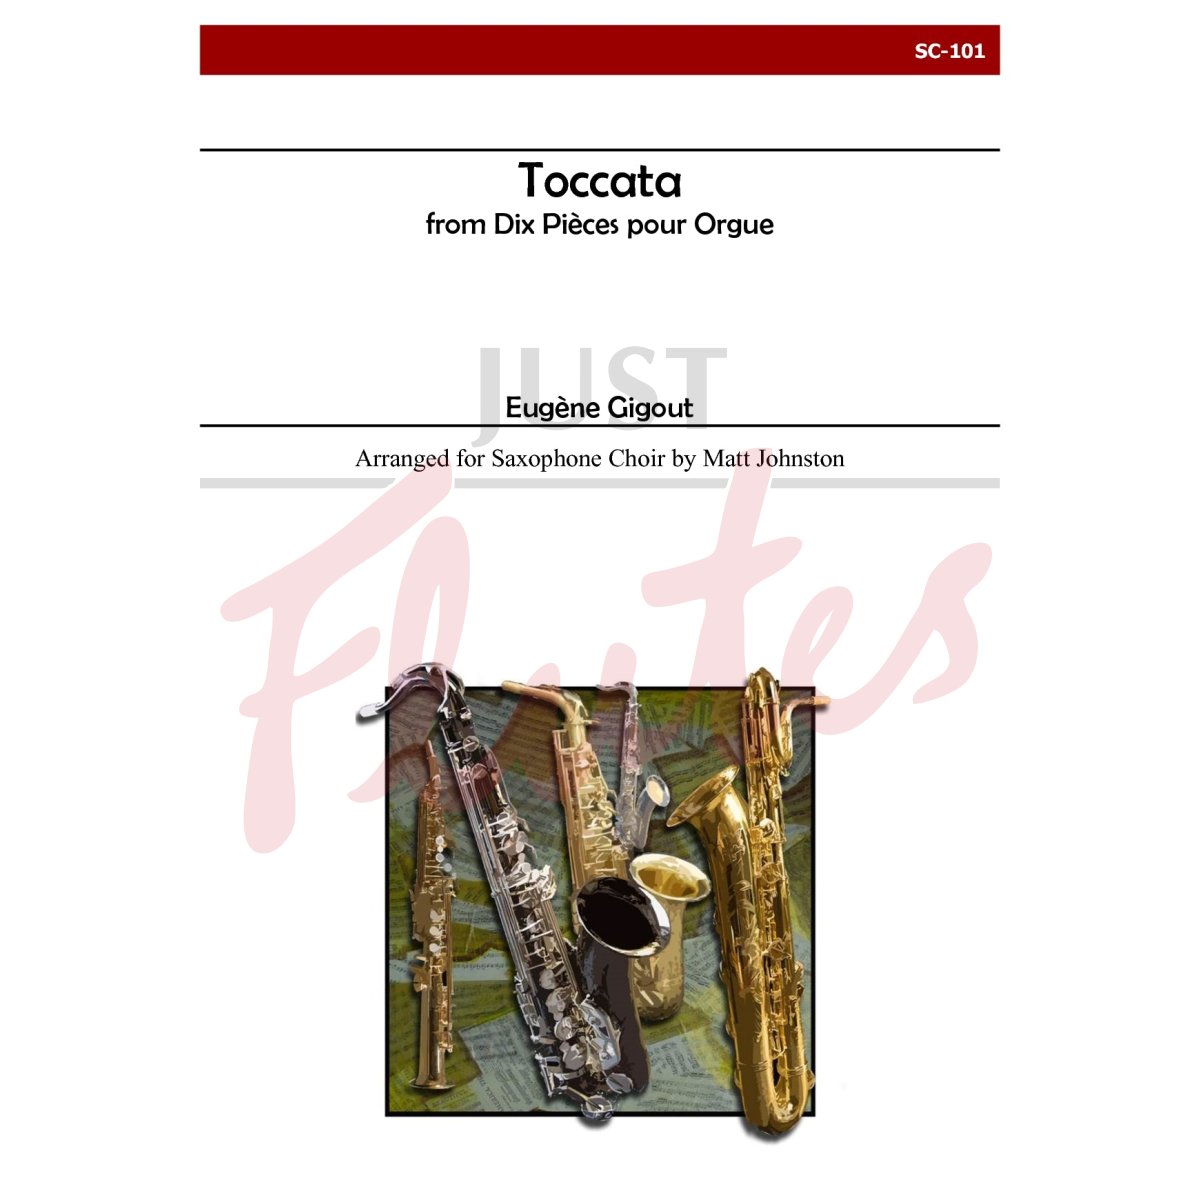 Toccata from Ten Pieces for Organ for Saxophone Choir